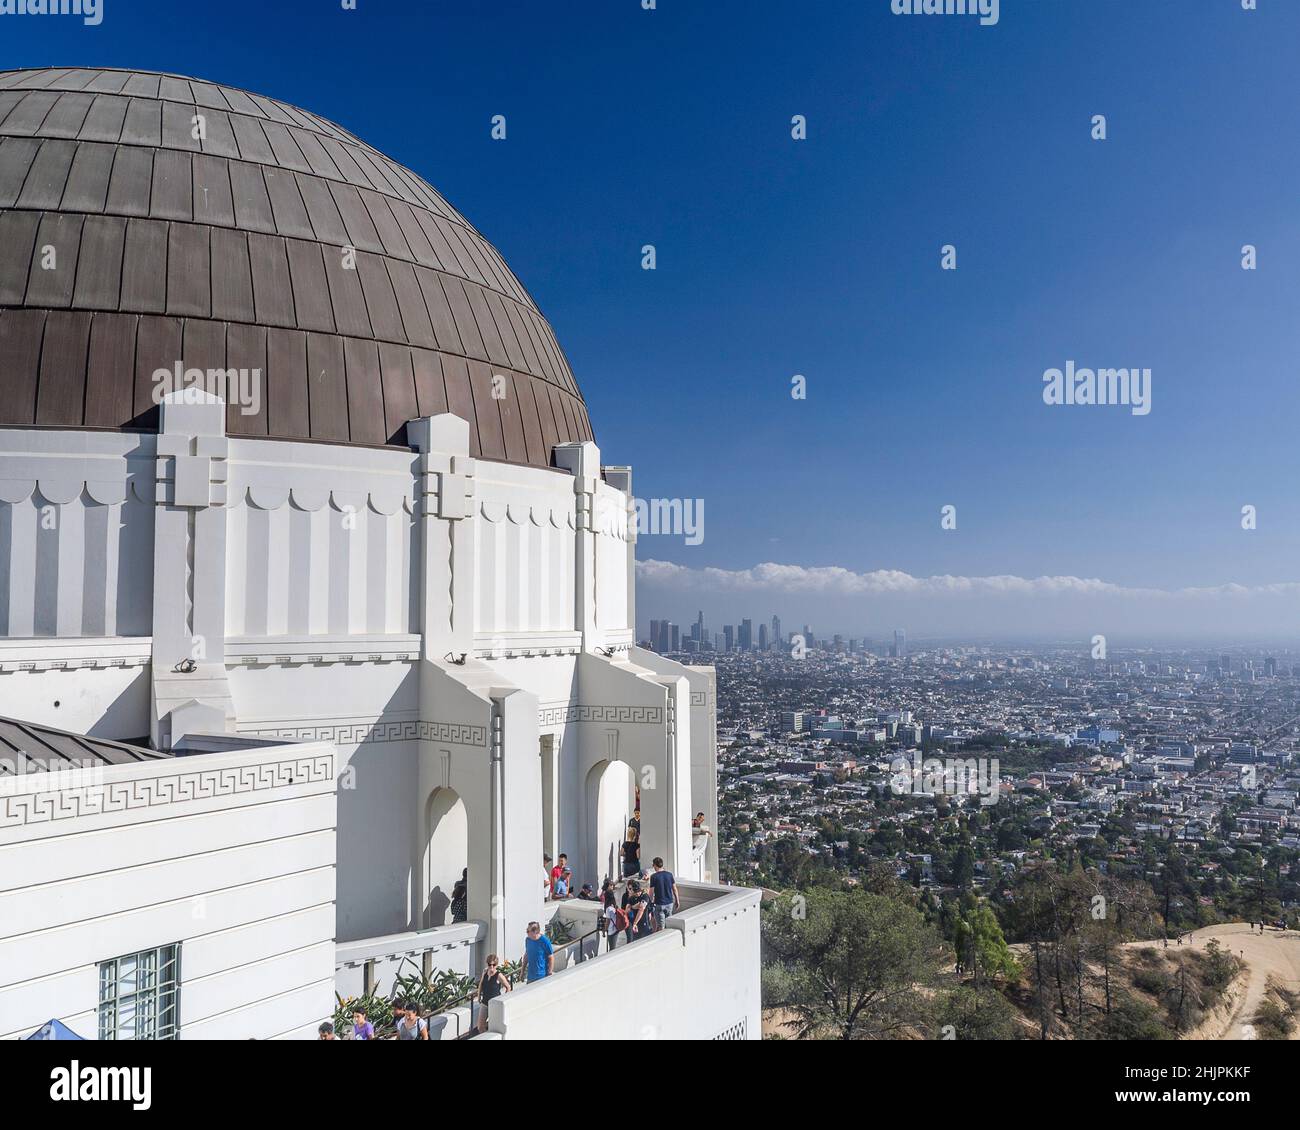 Los Angeles, CA, USA - January 16, 2016 - Exterior of the Griffith Observatory facade in Los Angeles, CA. Stock Photo